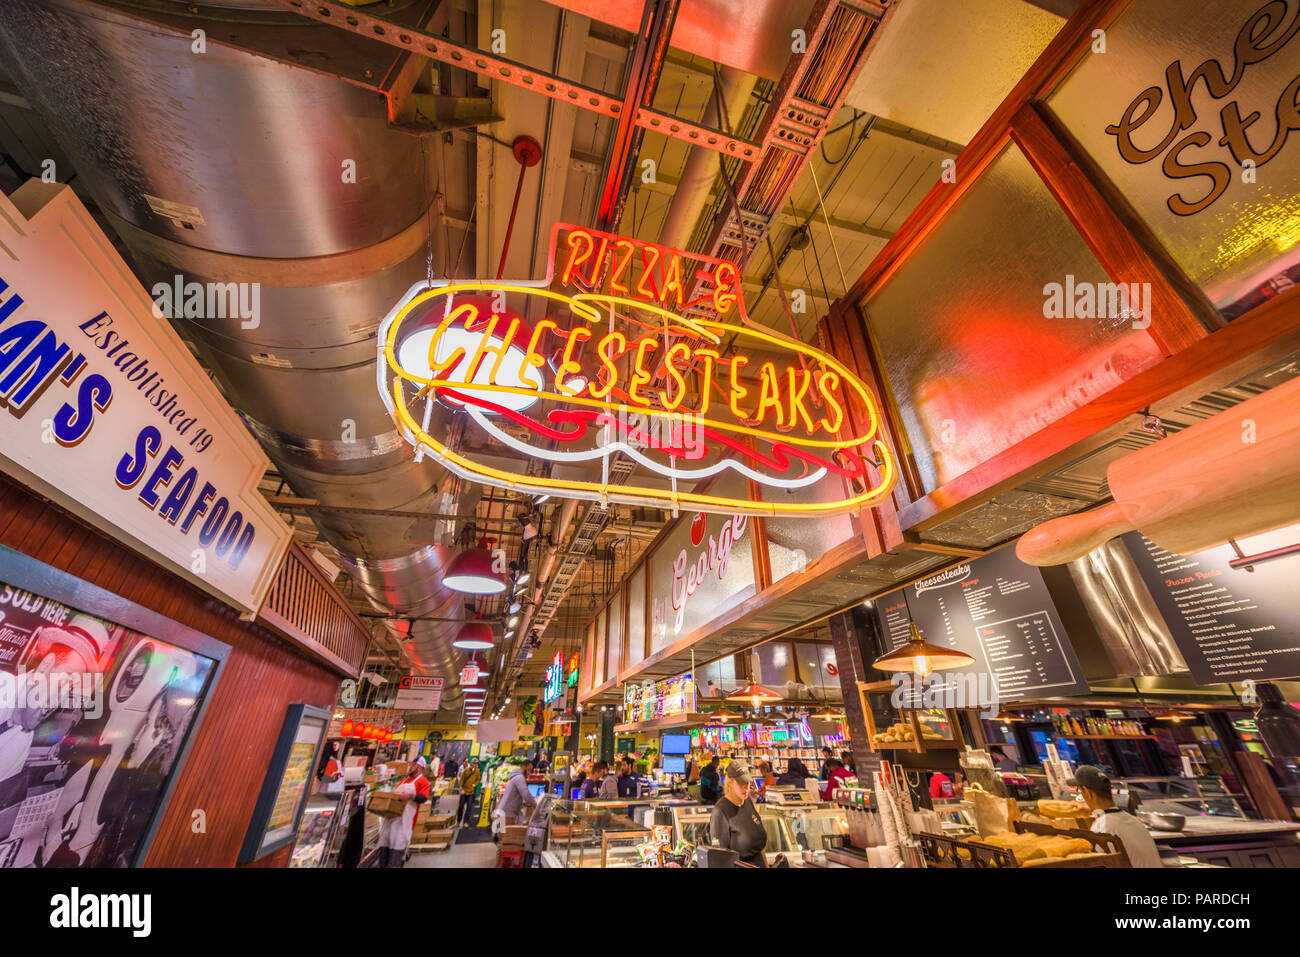 PHILADELPHIA, PENNSYLVANIA - NOVEMBER 18, 2016: Vendors and customers in Reading Terminal Market. The historic market is a popular attraction for culi Stock Photo